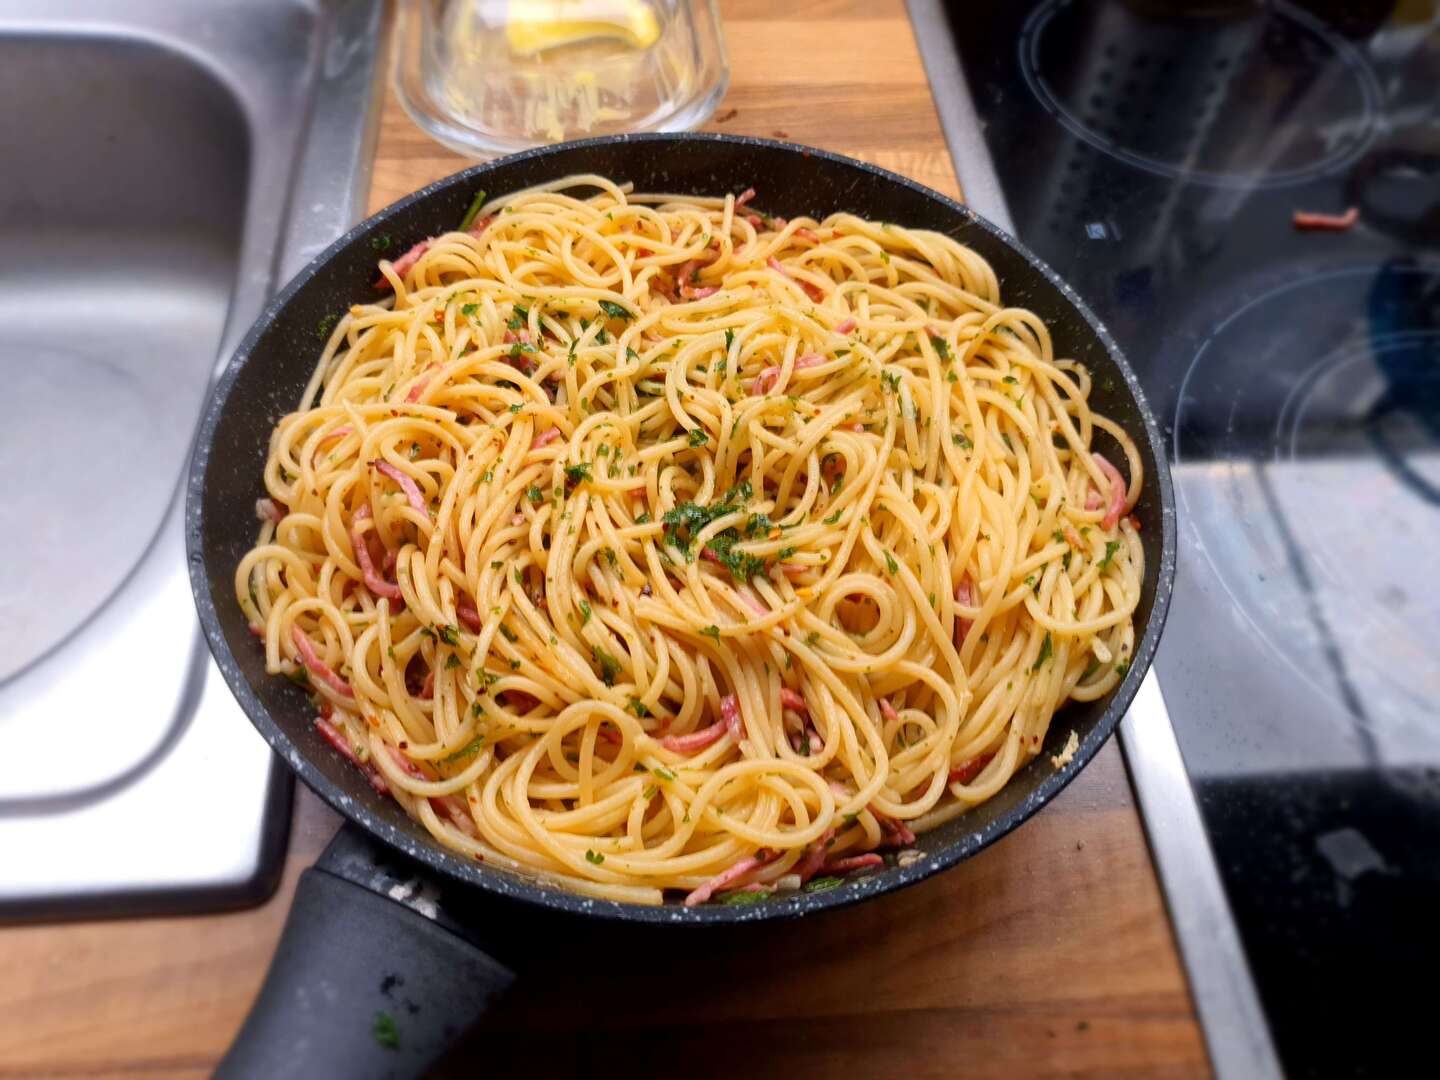 a photo of a pan that contains spaghetti with parsley and meat slices